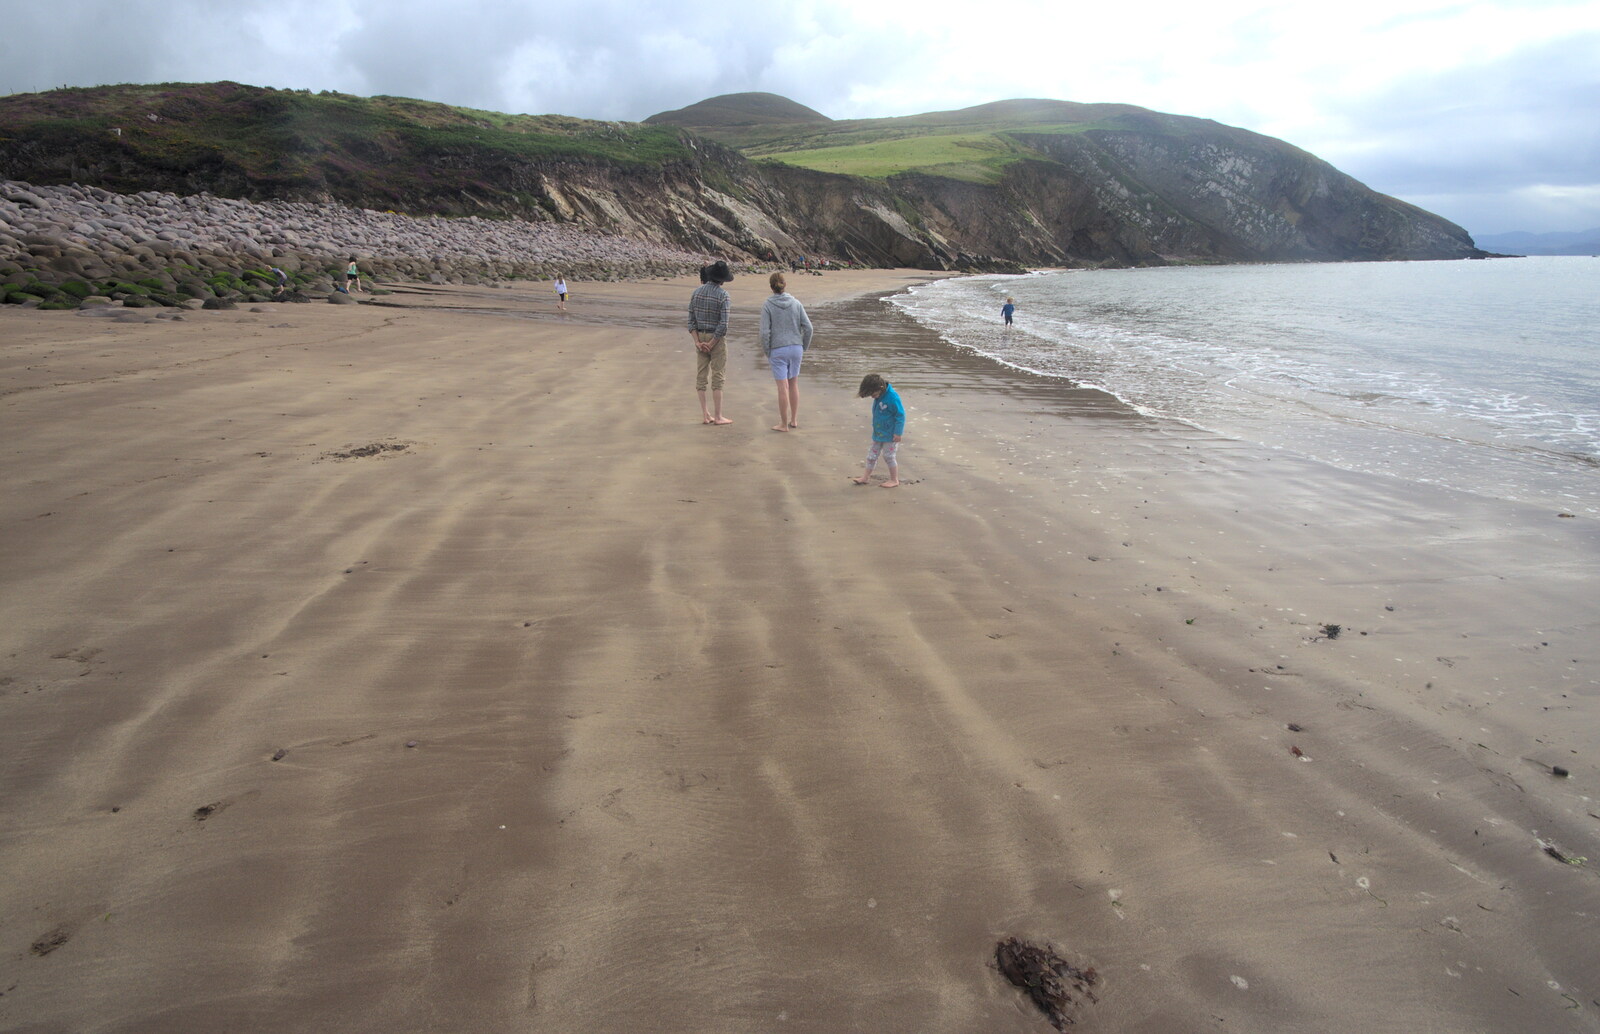 Philly and Isobel walk around on the beach from Minard Beach and Ceol Agus Craic, Lios Póil, Kerry - 6th August 2017